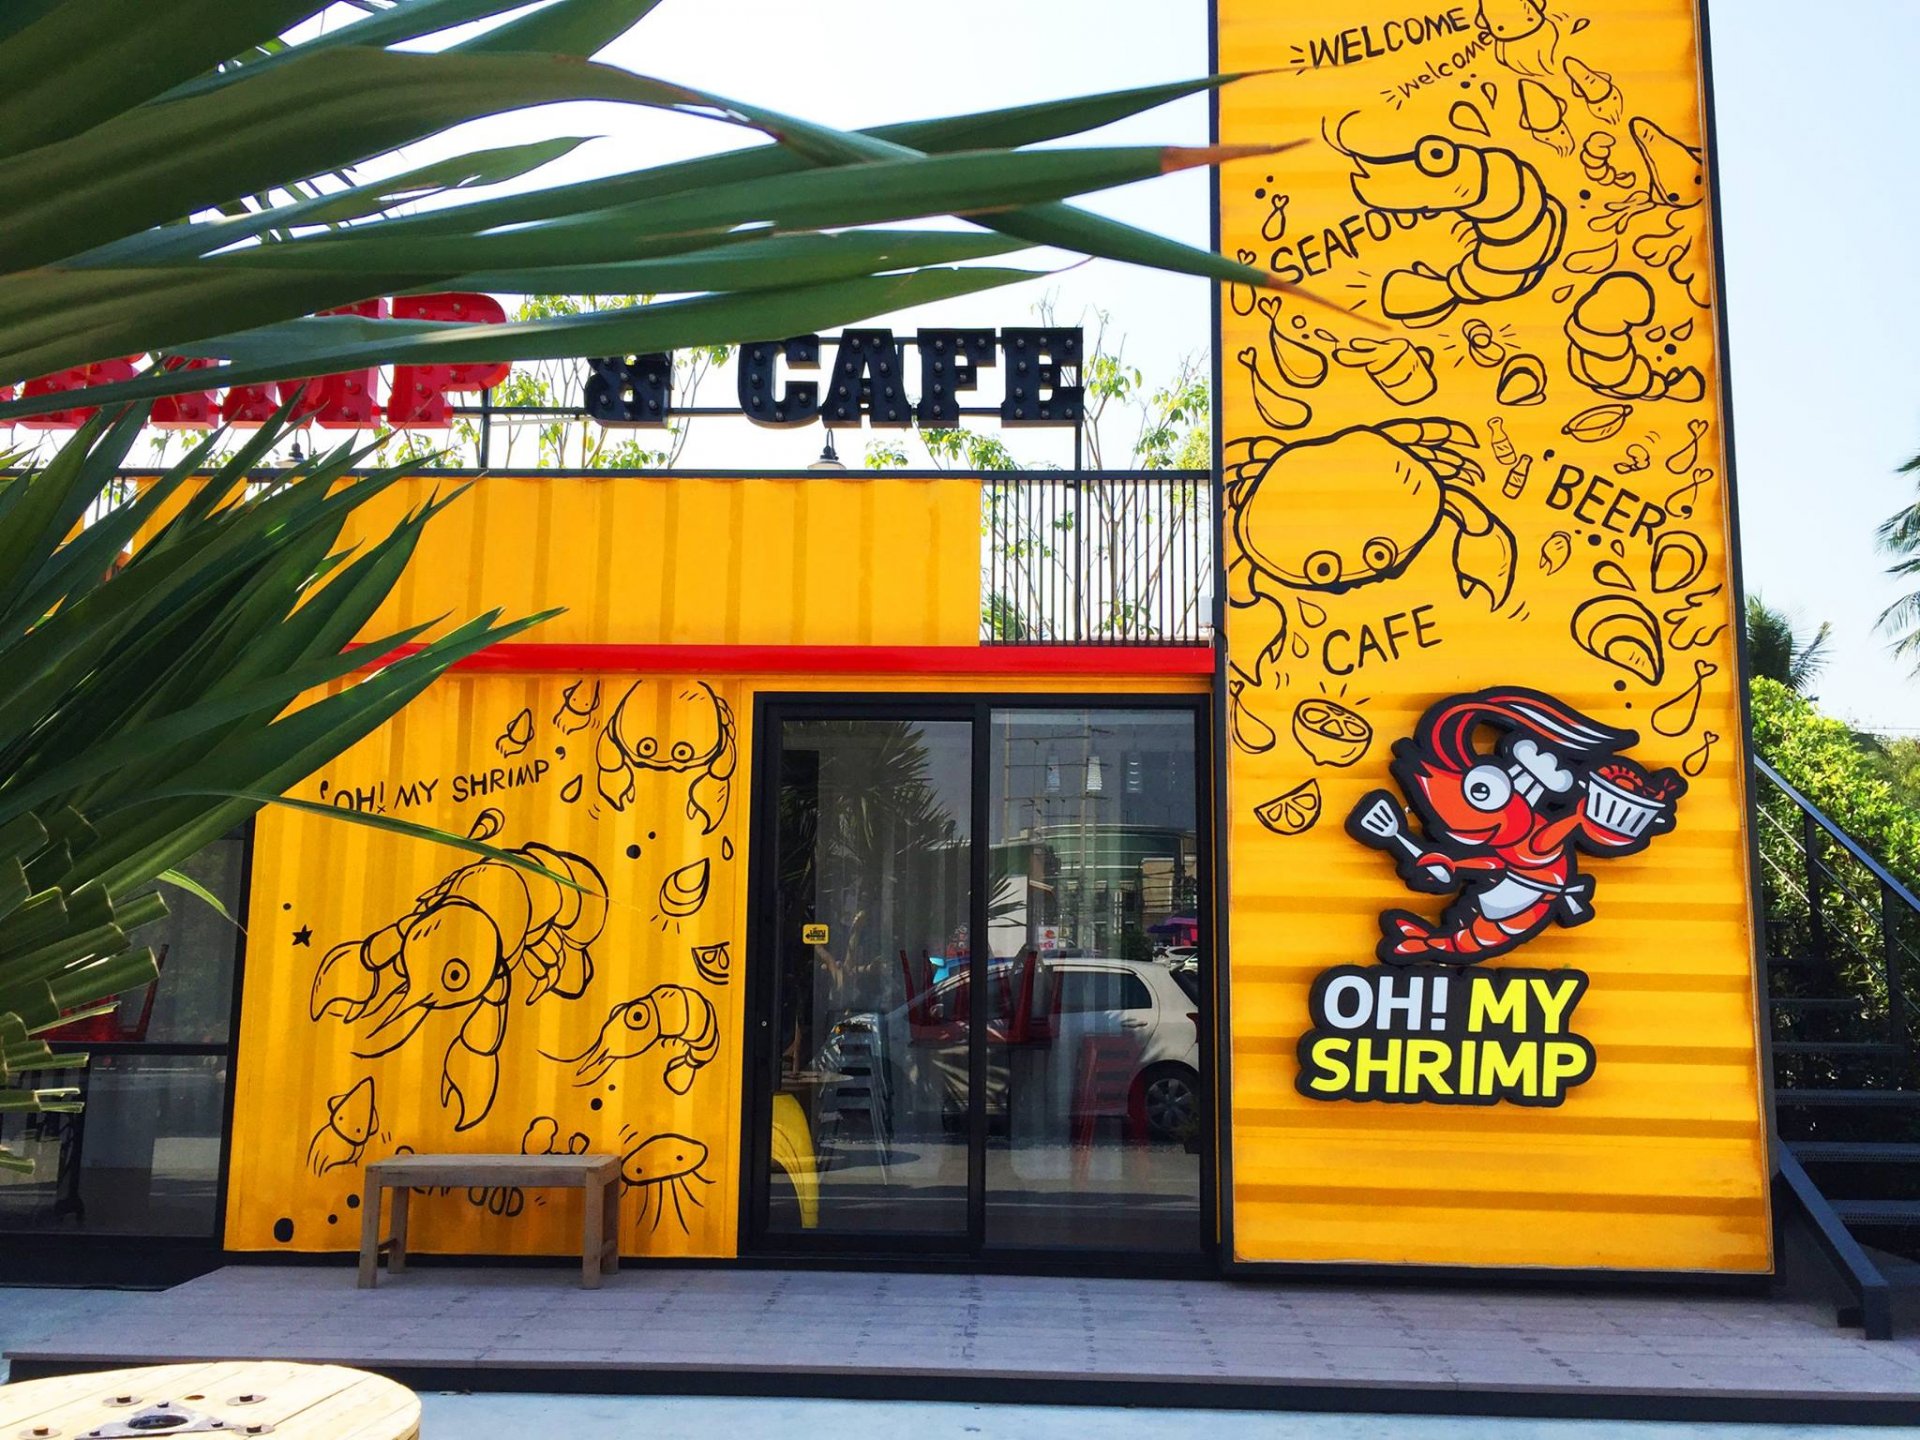 "Oh! My Shrimp & Cafe" Wall Painting